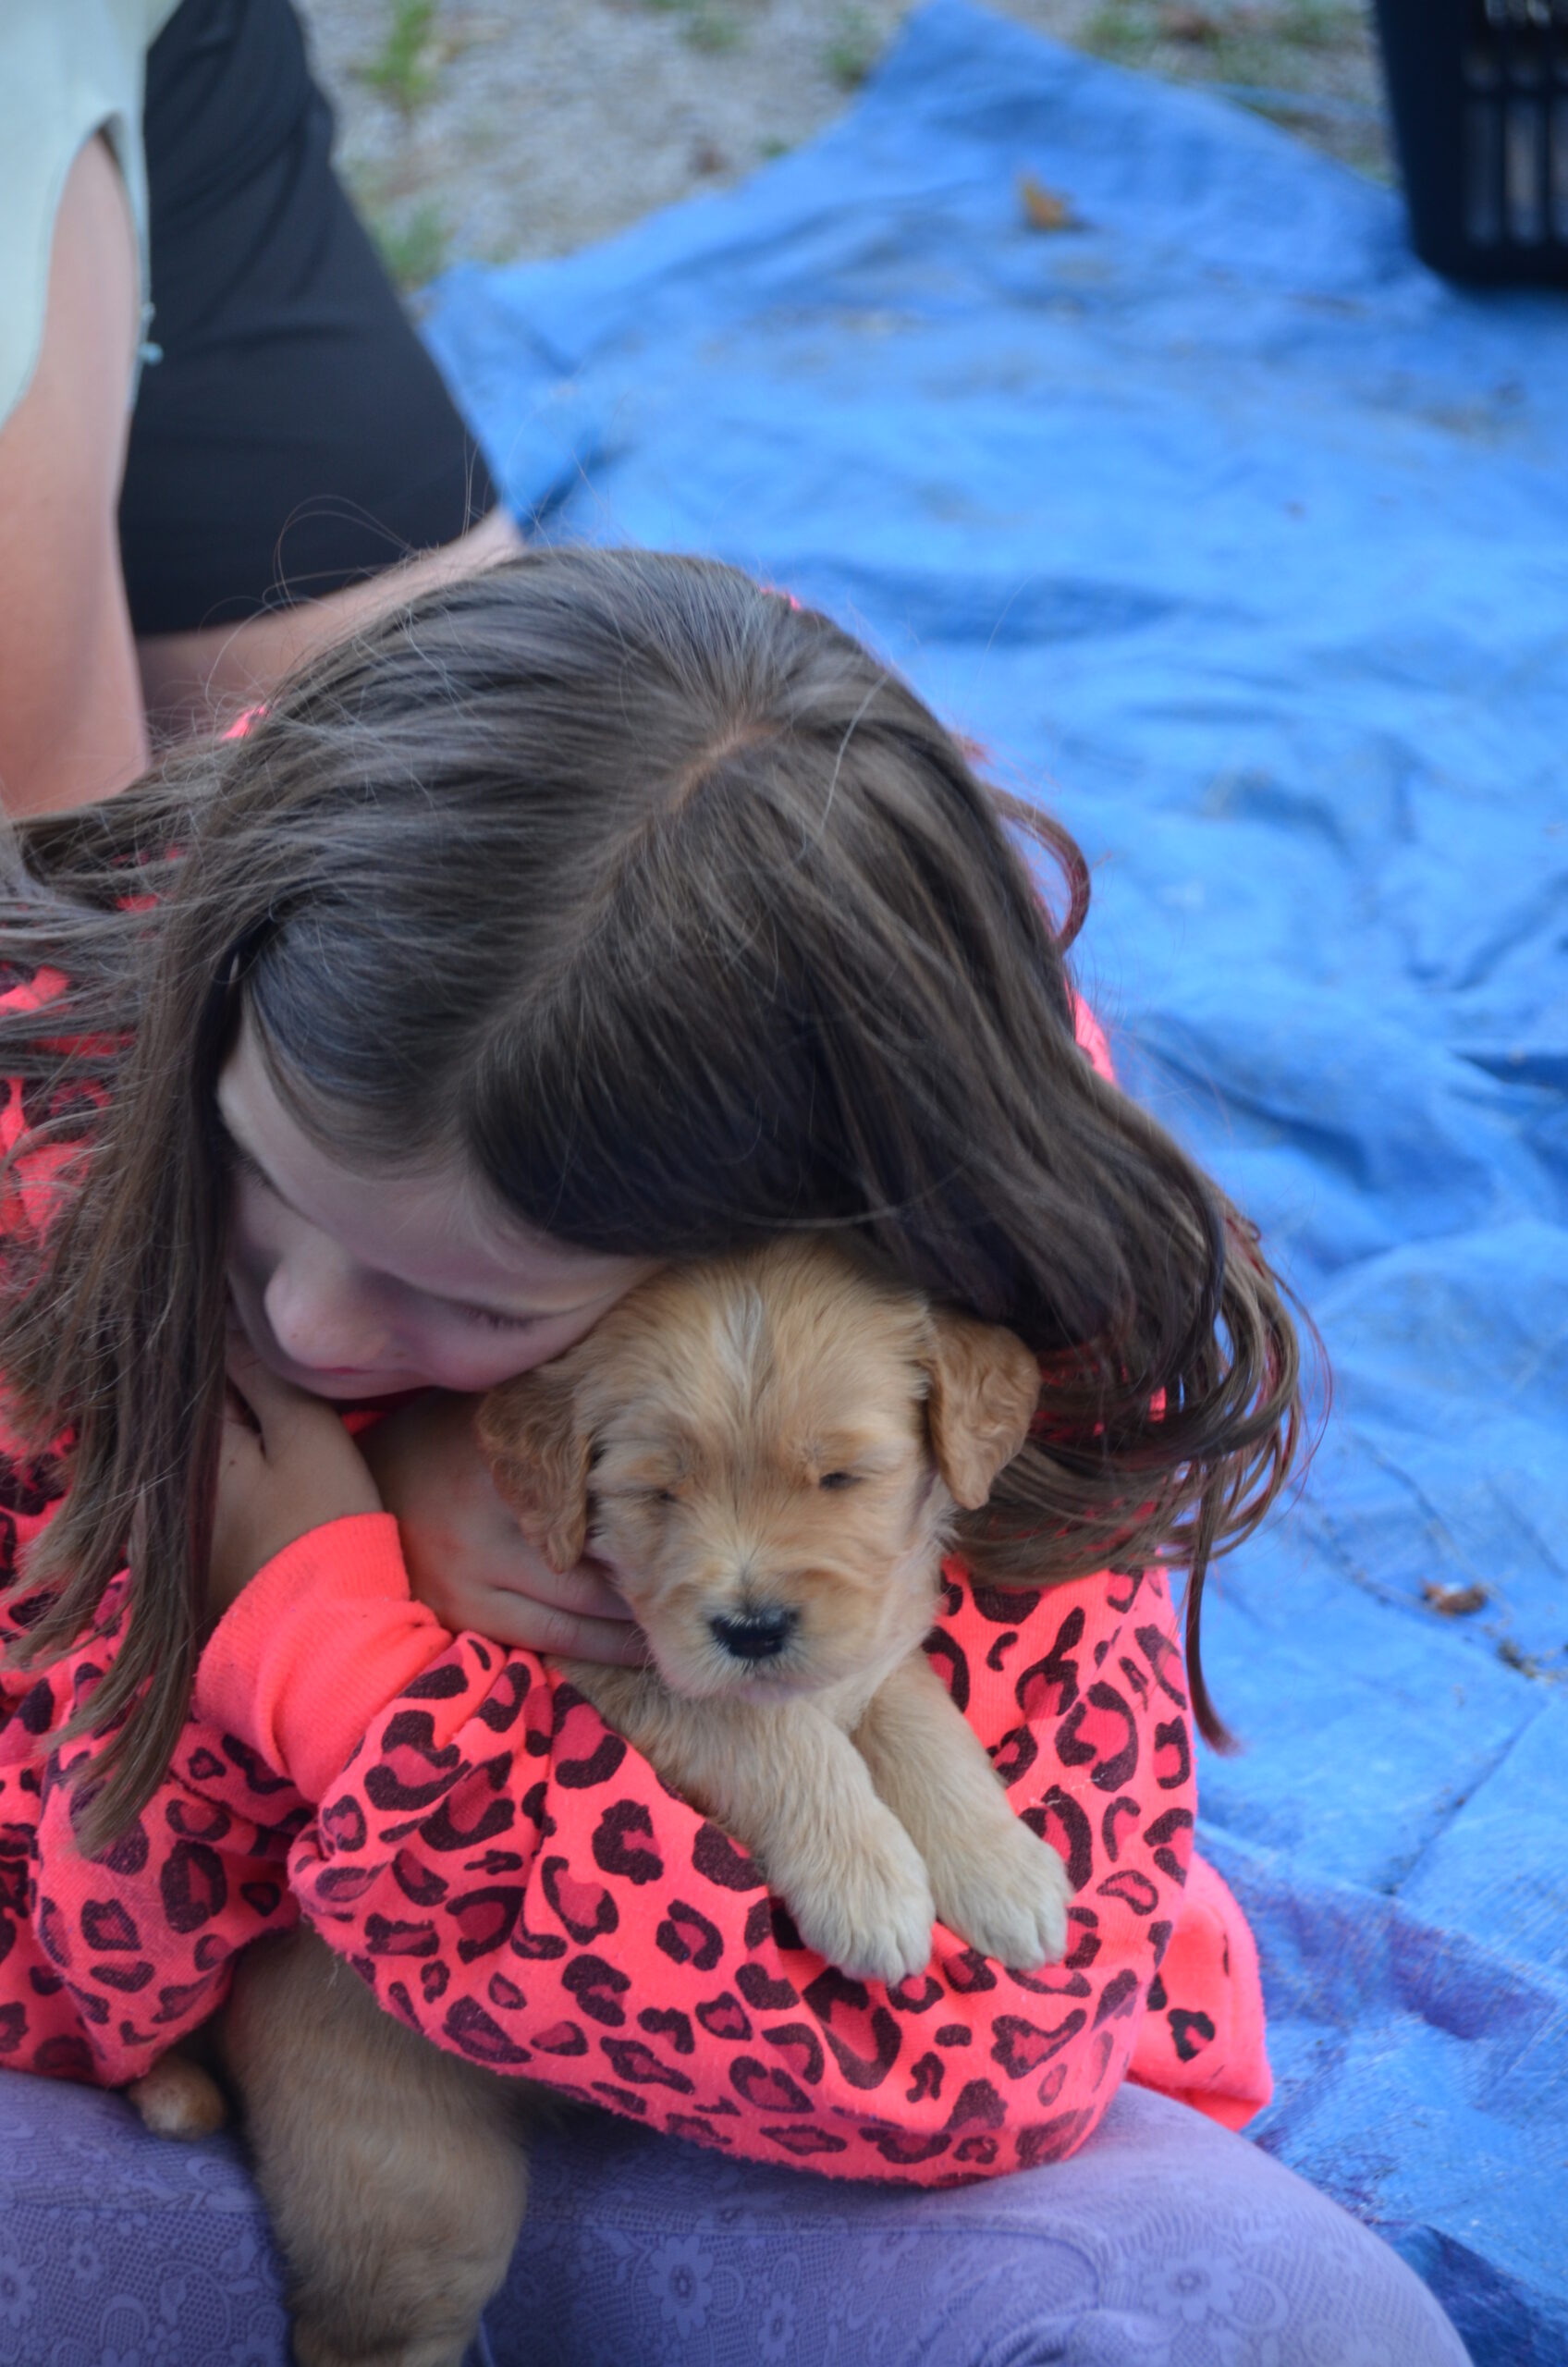 Girl holding Goldendoodle puppy.